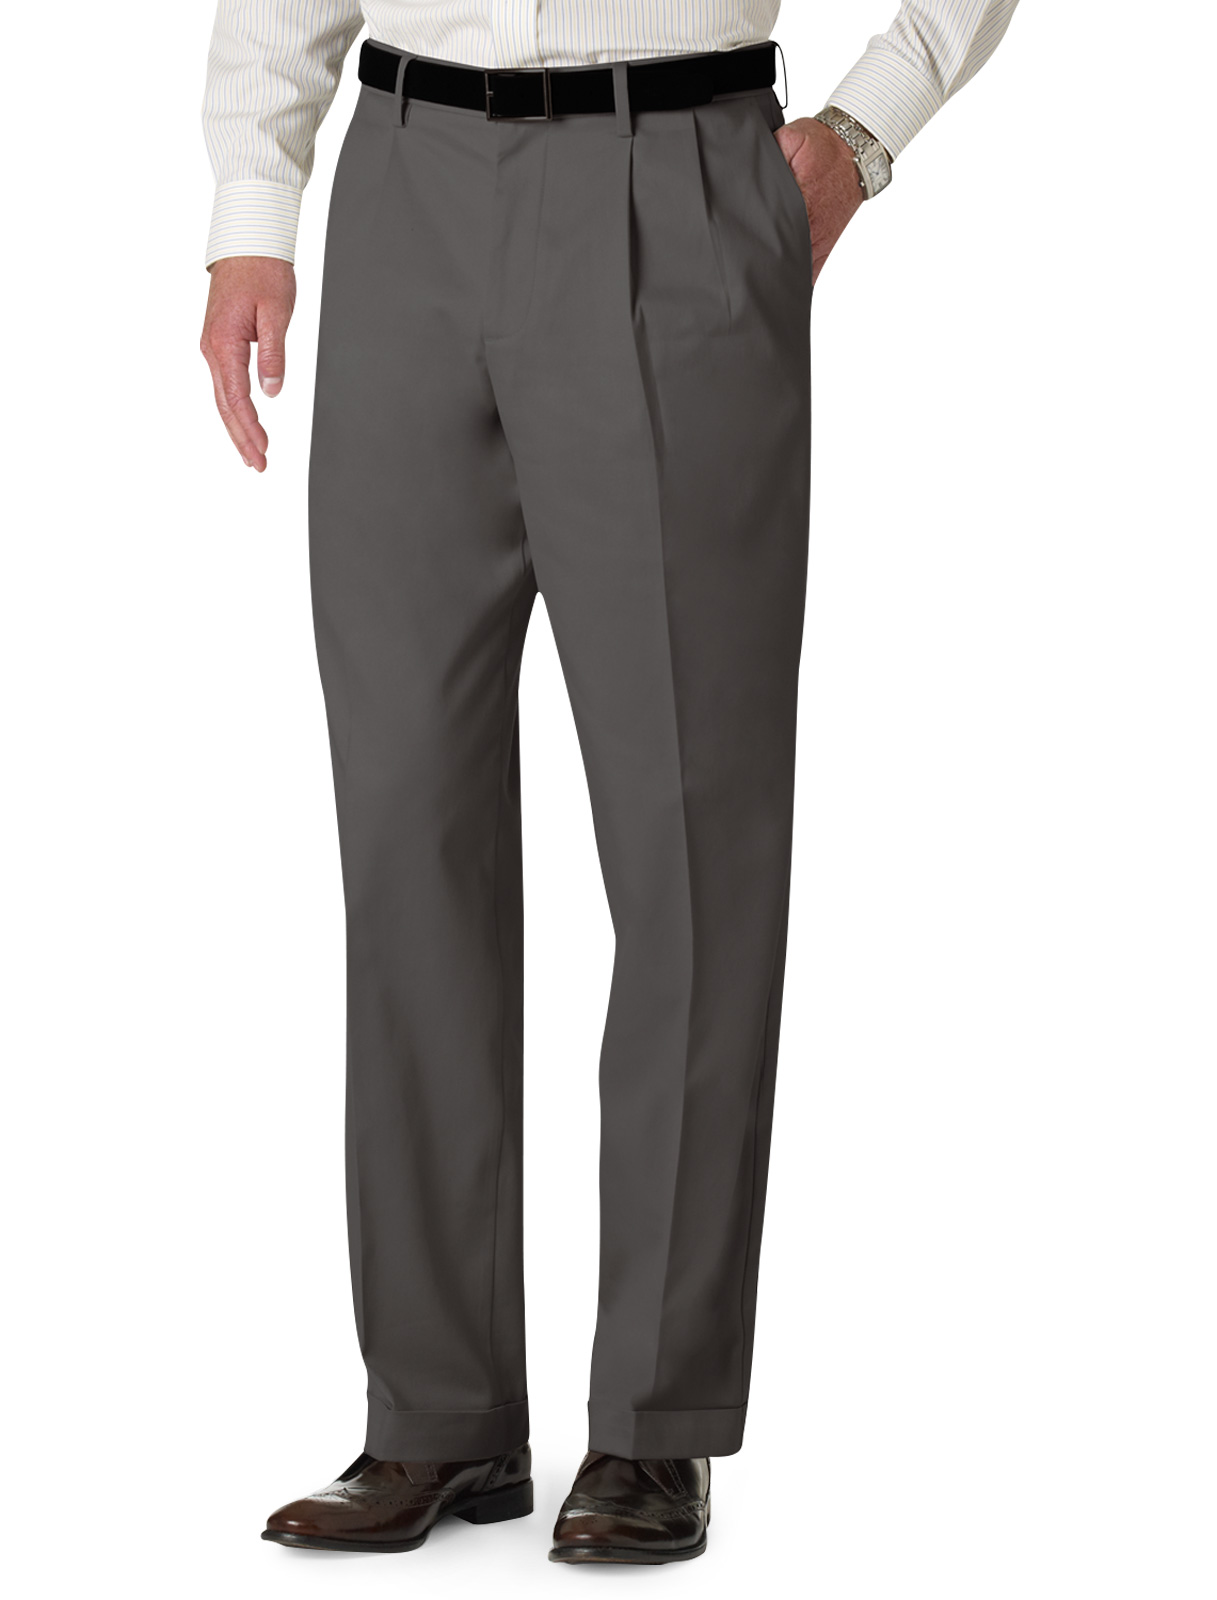 Dockers Men's Big and Tall Iron Free Pleated Pants